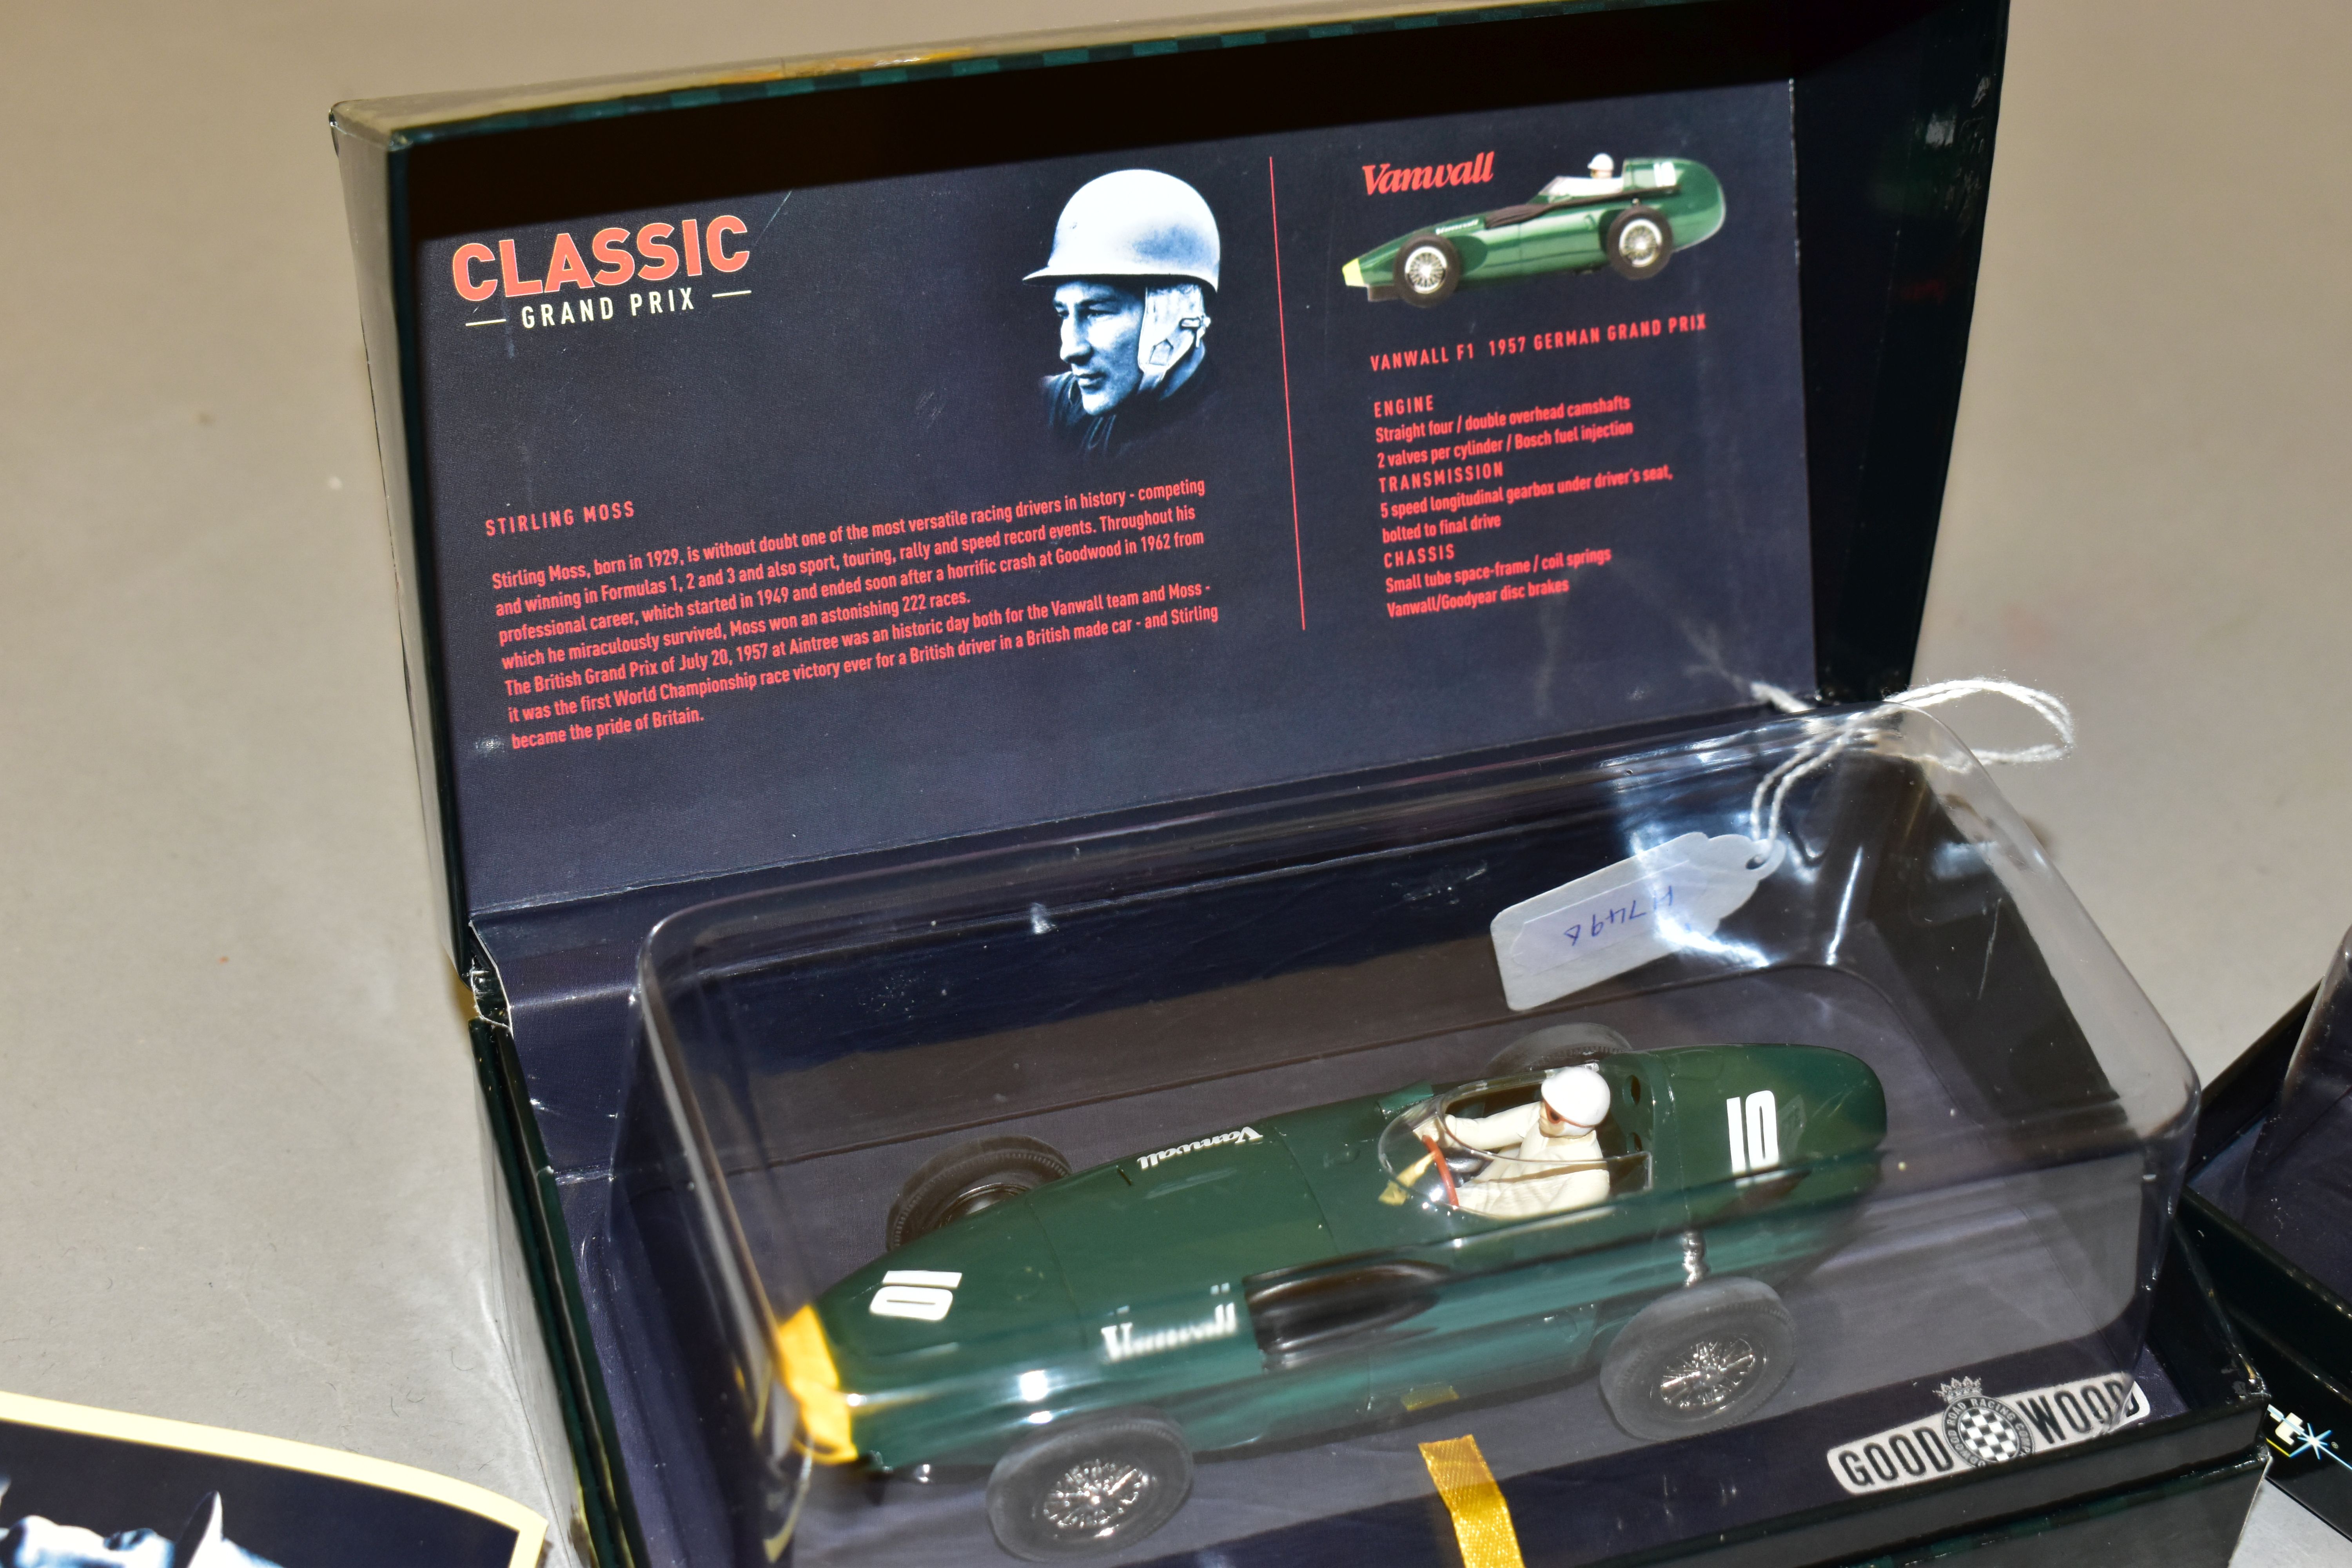 THREE BOXED SCALEXTRIC LIMITED EDITION CLASSIC GRAND PRIX GOODWOOD REVIVAL MEETING F1 RACING CARS, - Image 4 of 8